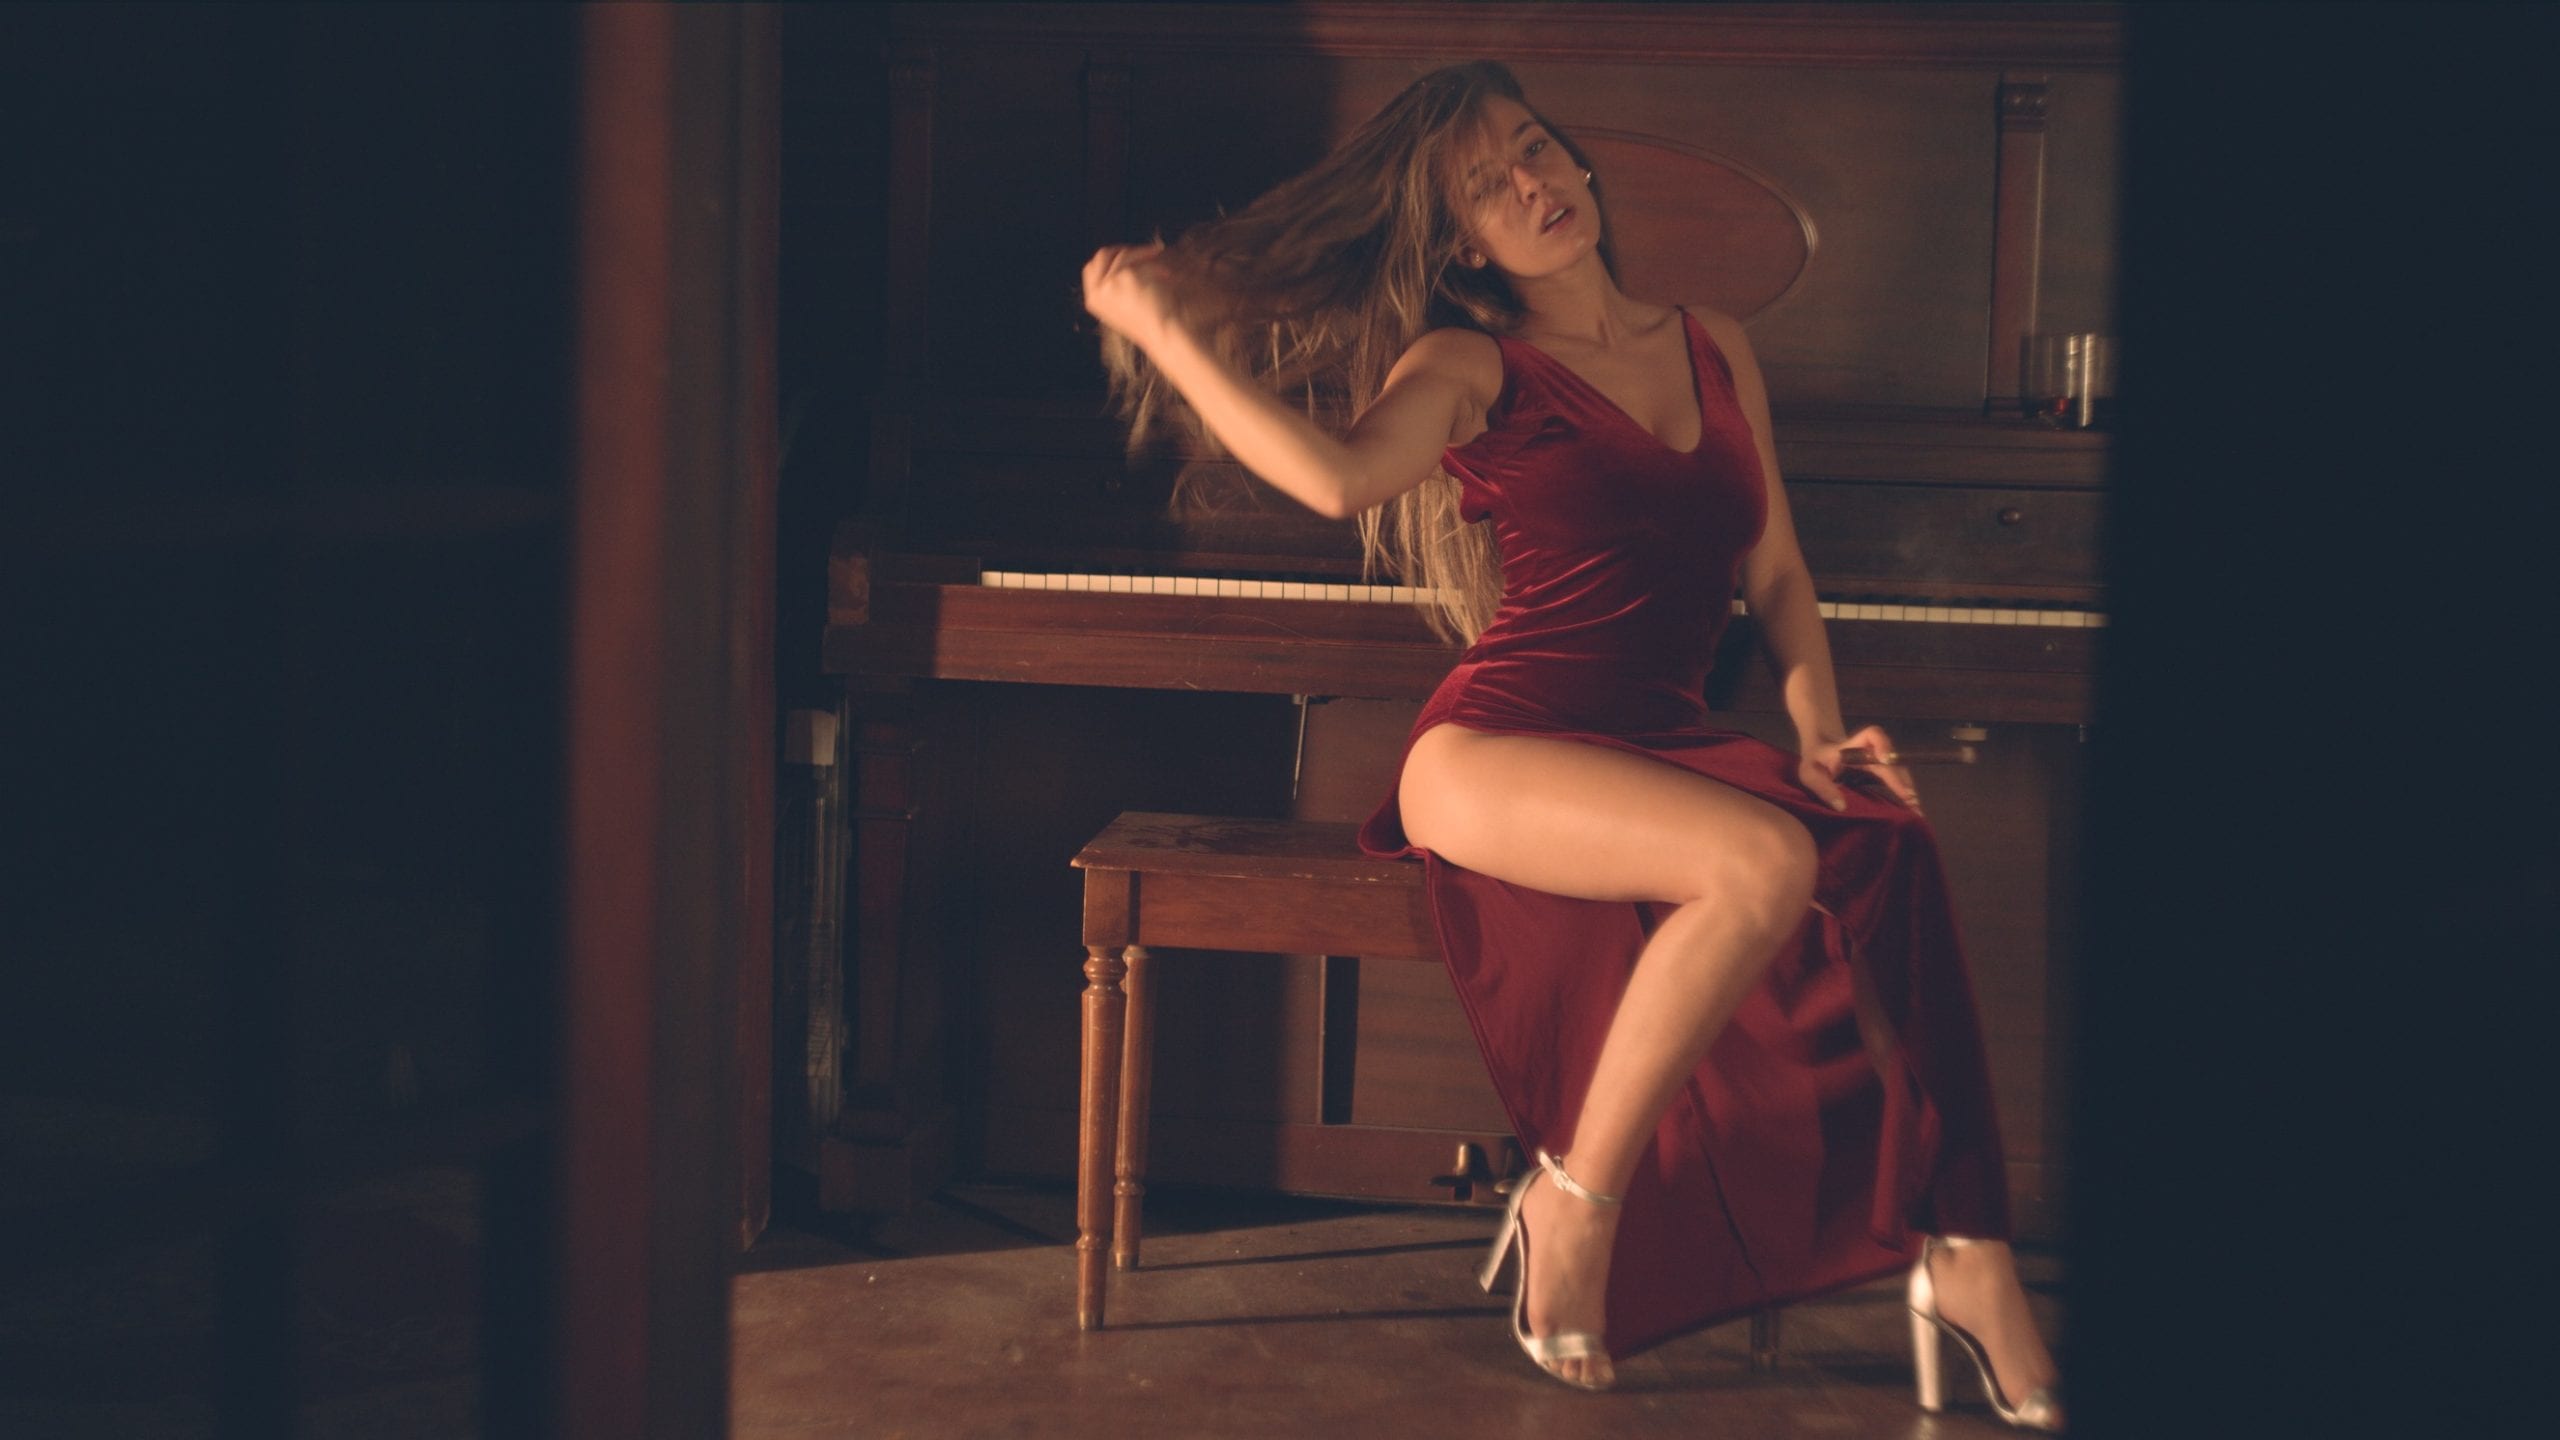 Sabela Model posing for camera sitting at a piano wearing a red dress holding a cigar and high heels